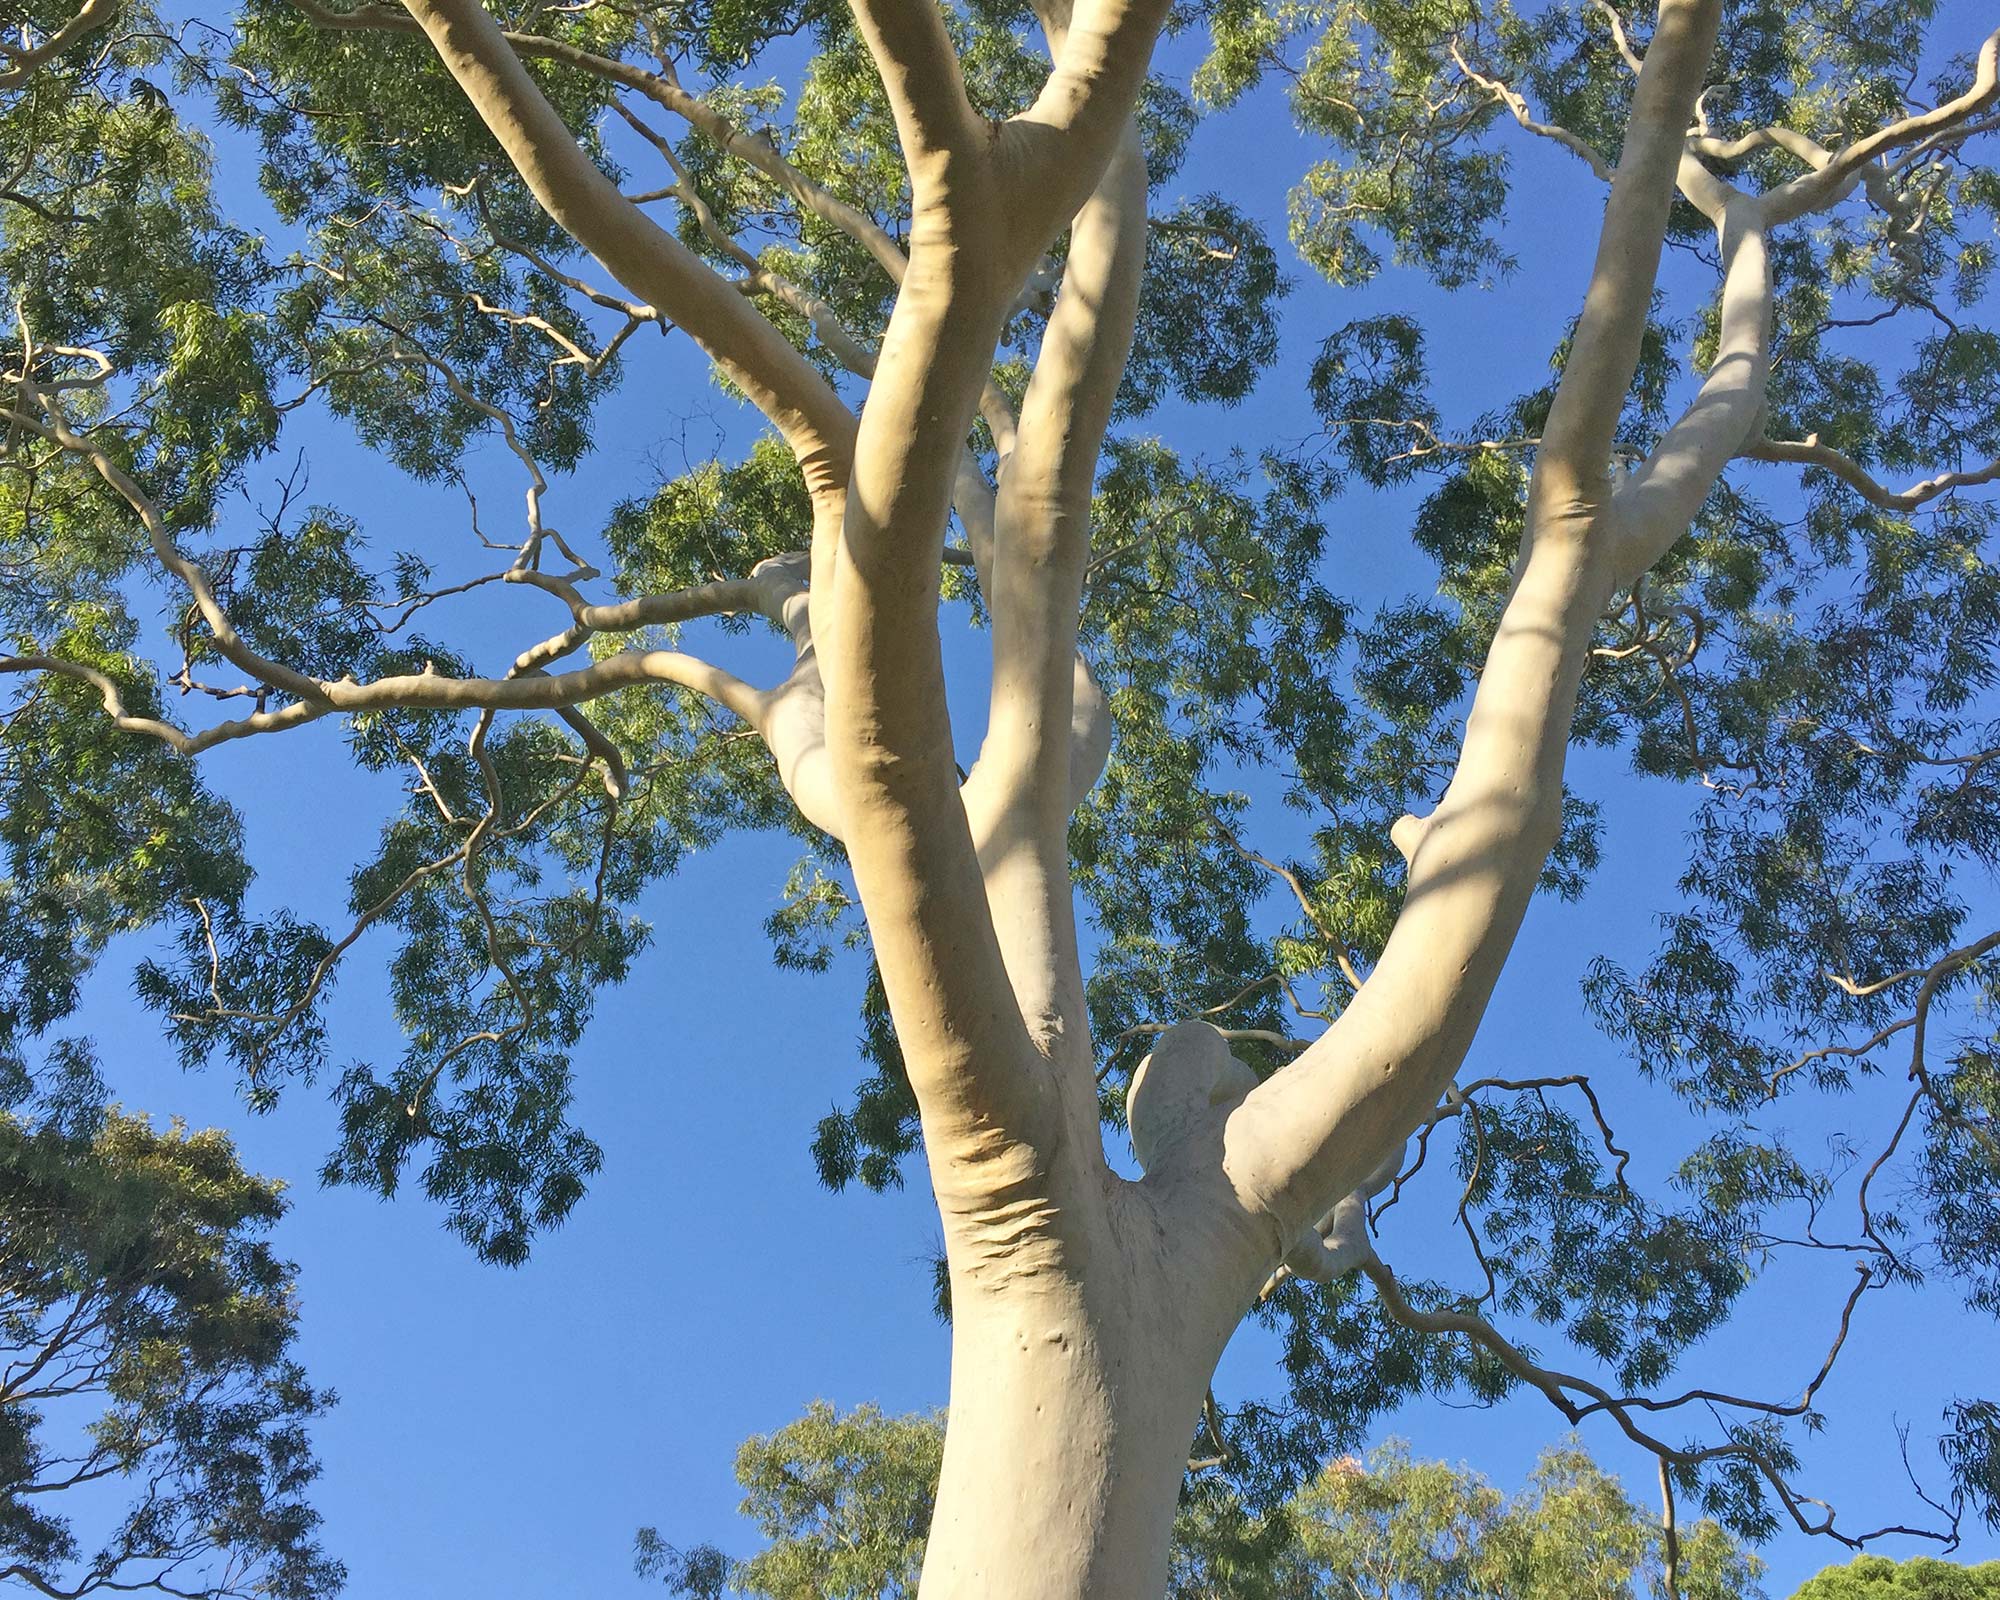 Wrinkles in the bark below the branches - Corymbia citriodora